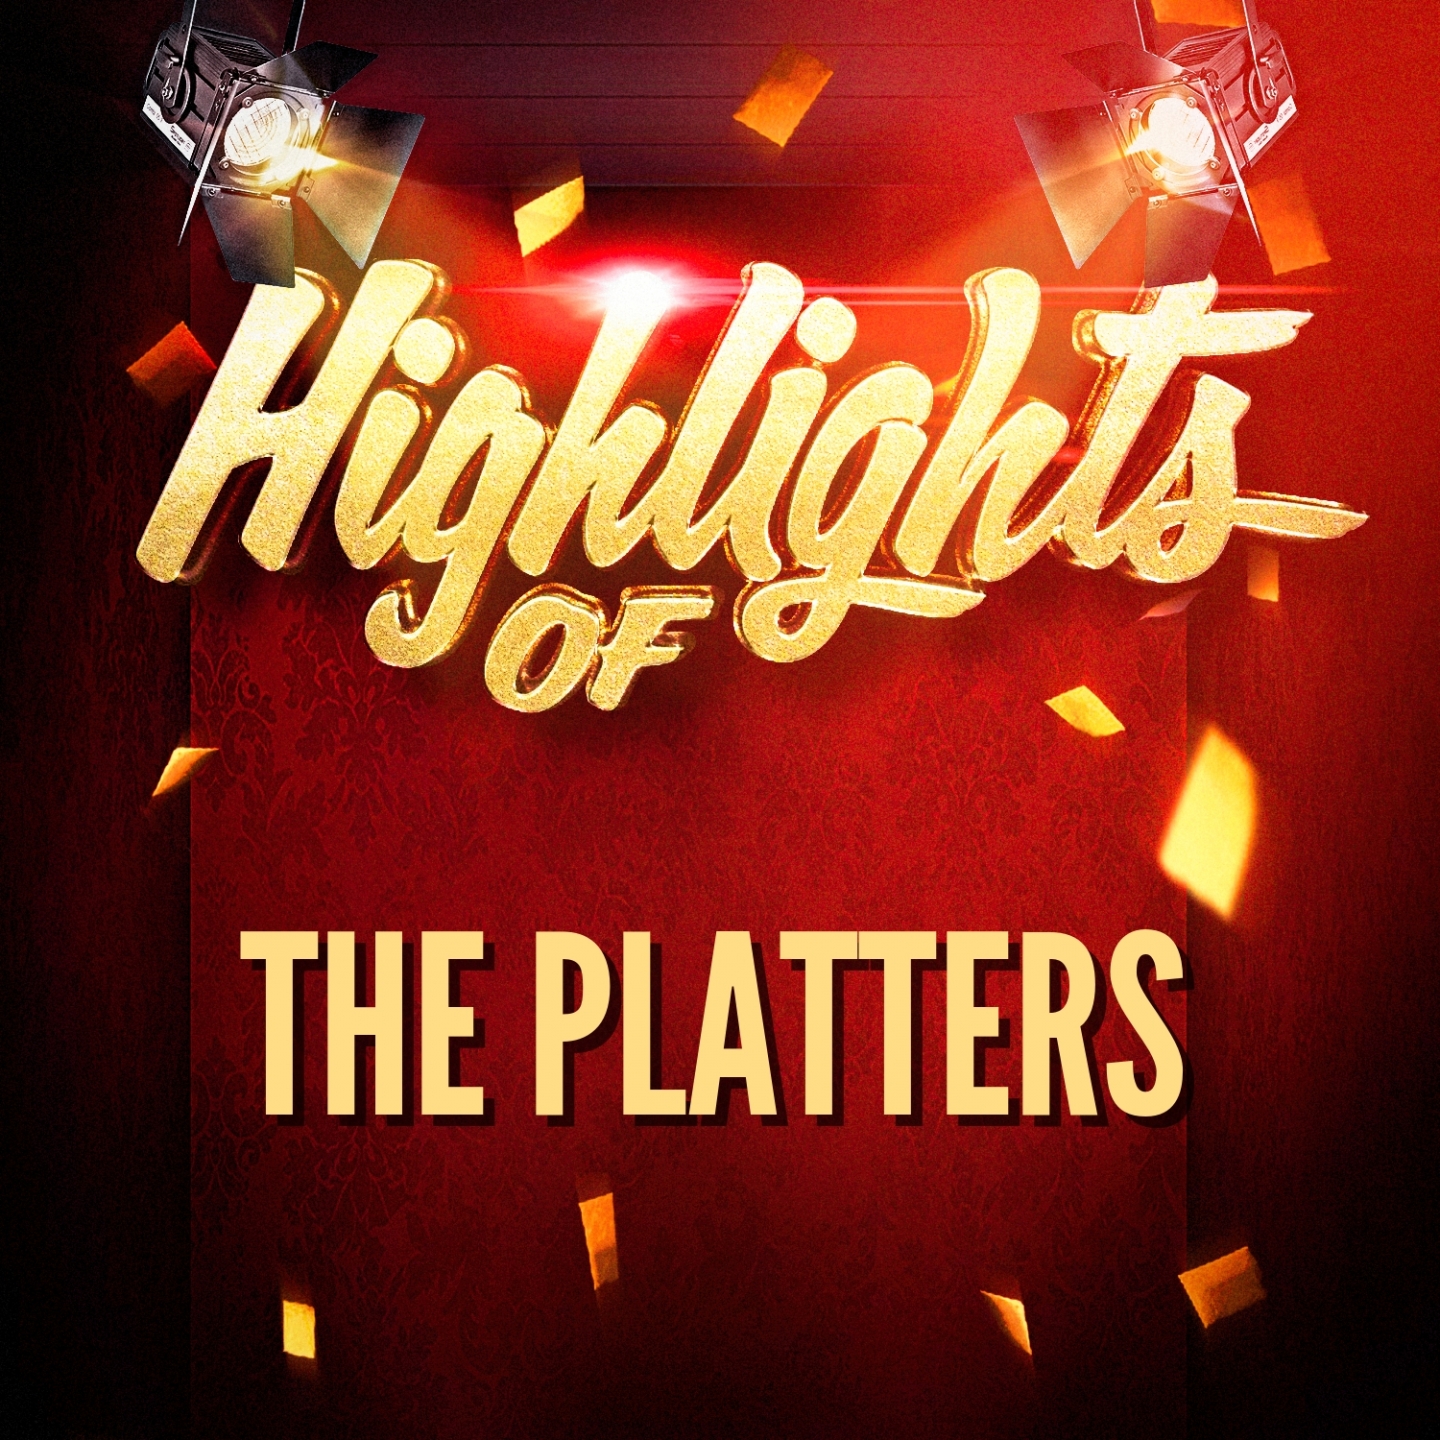 Highlights of The Platters